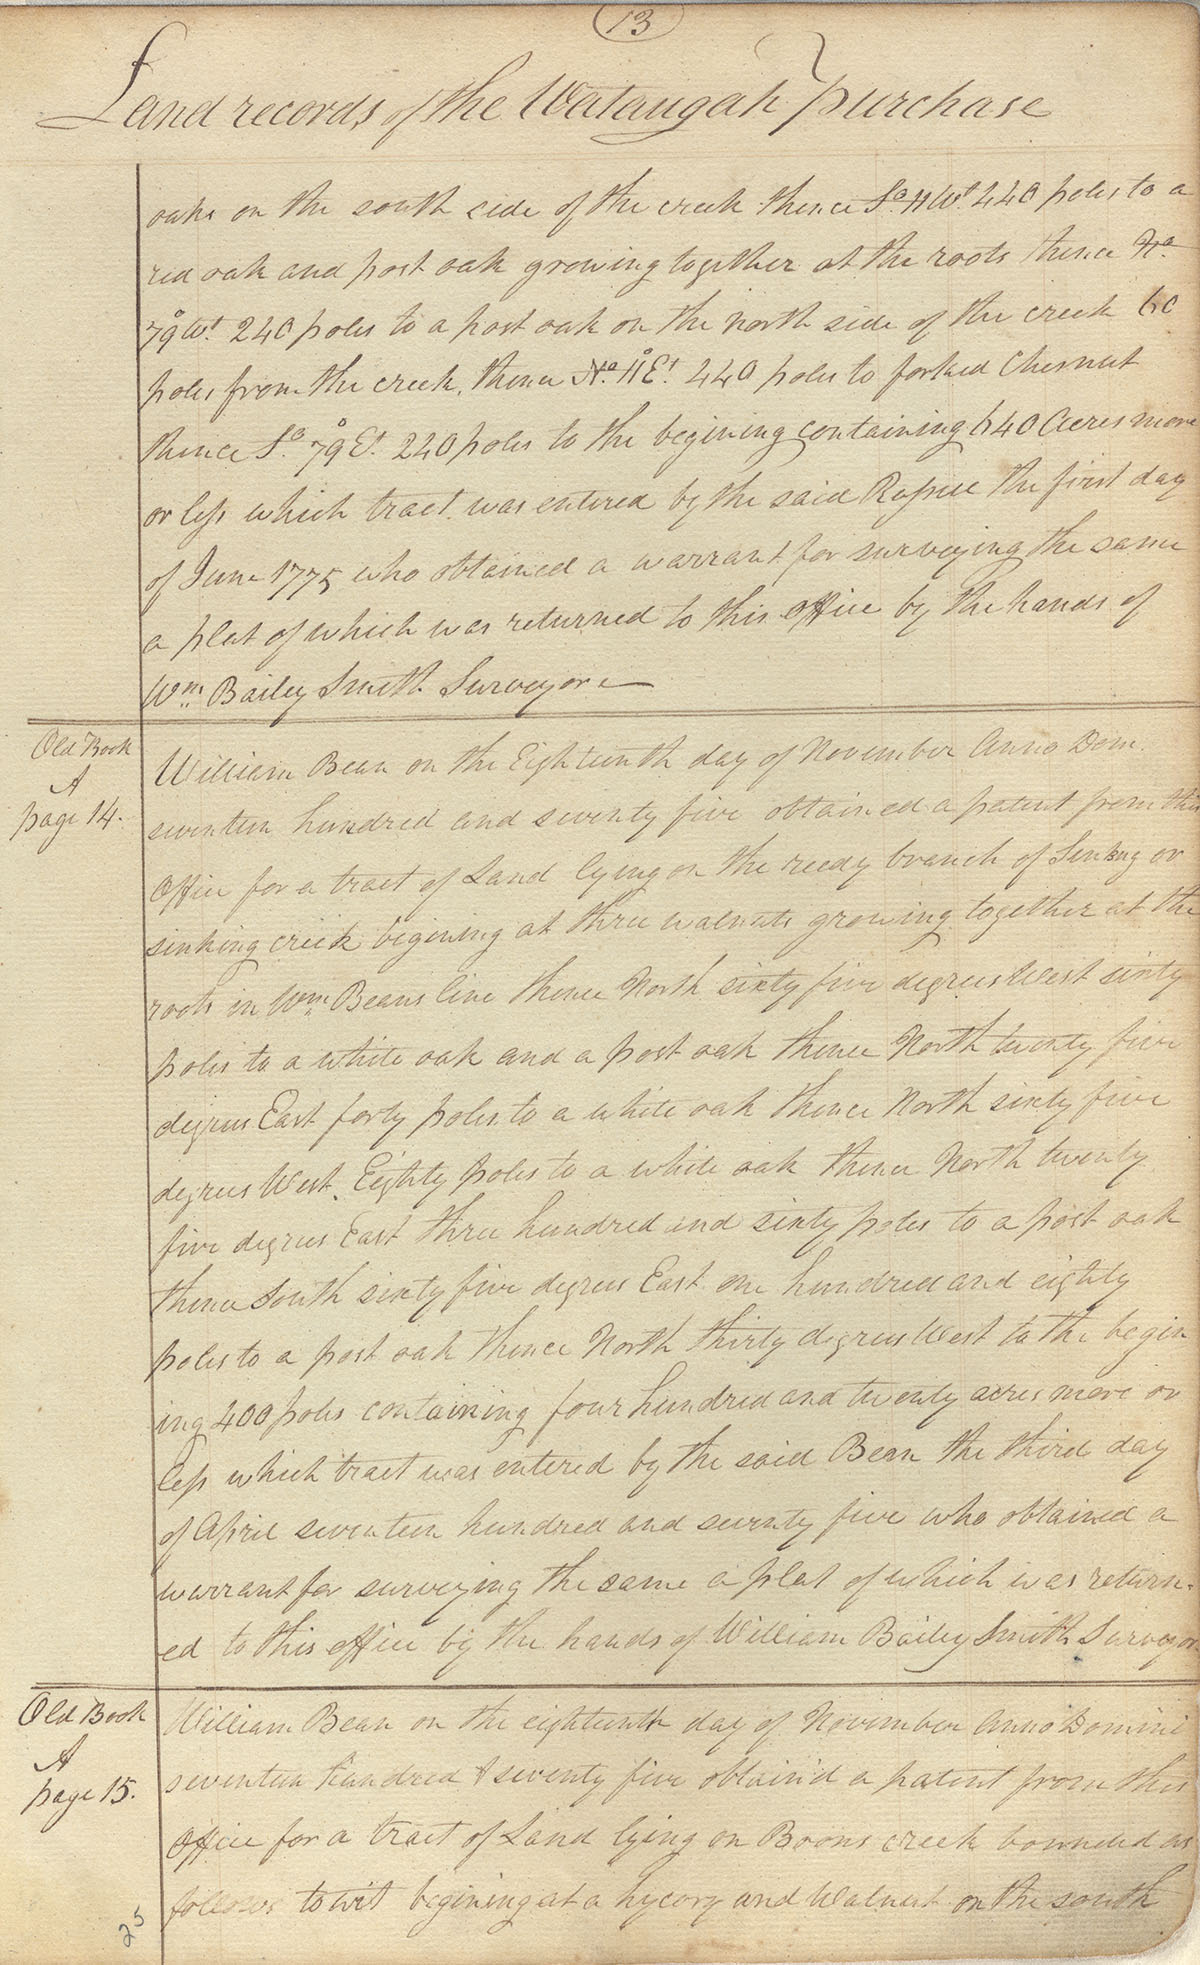 A page from the Watauga Purchase, the first transfer of land in Tennessee from natives to settlers such as William Bean